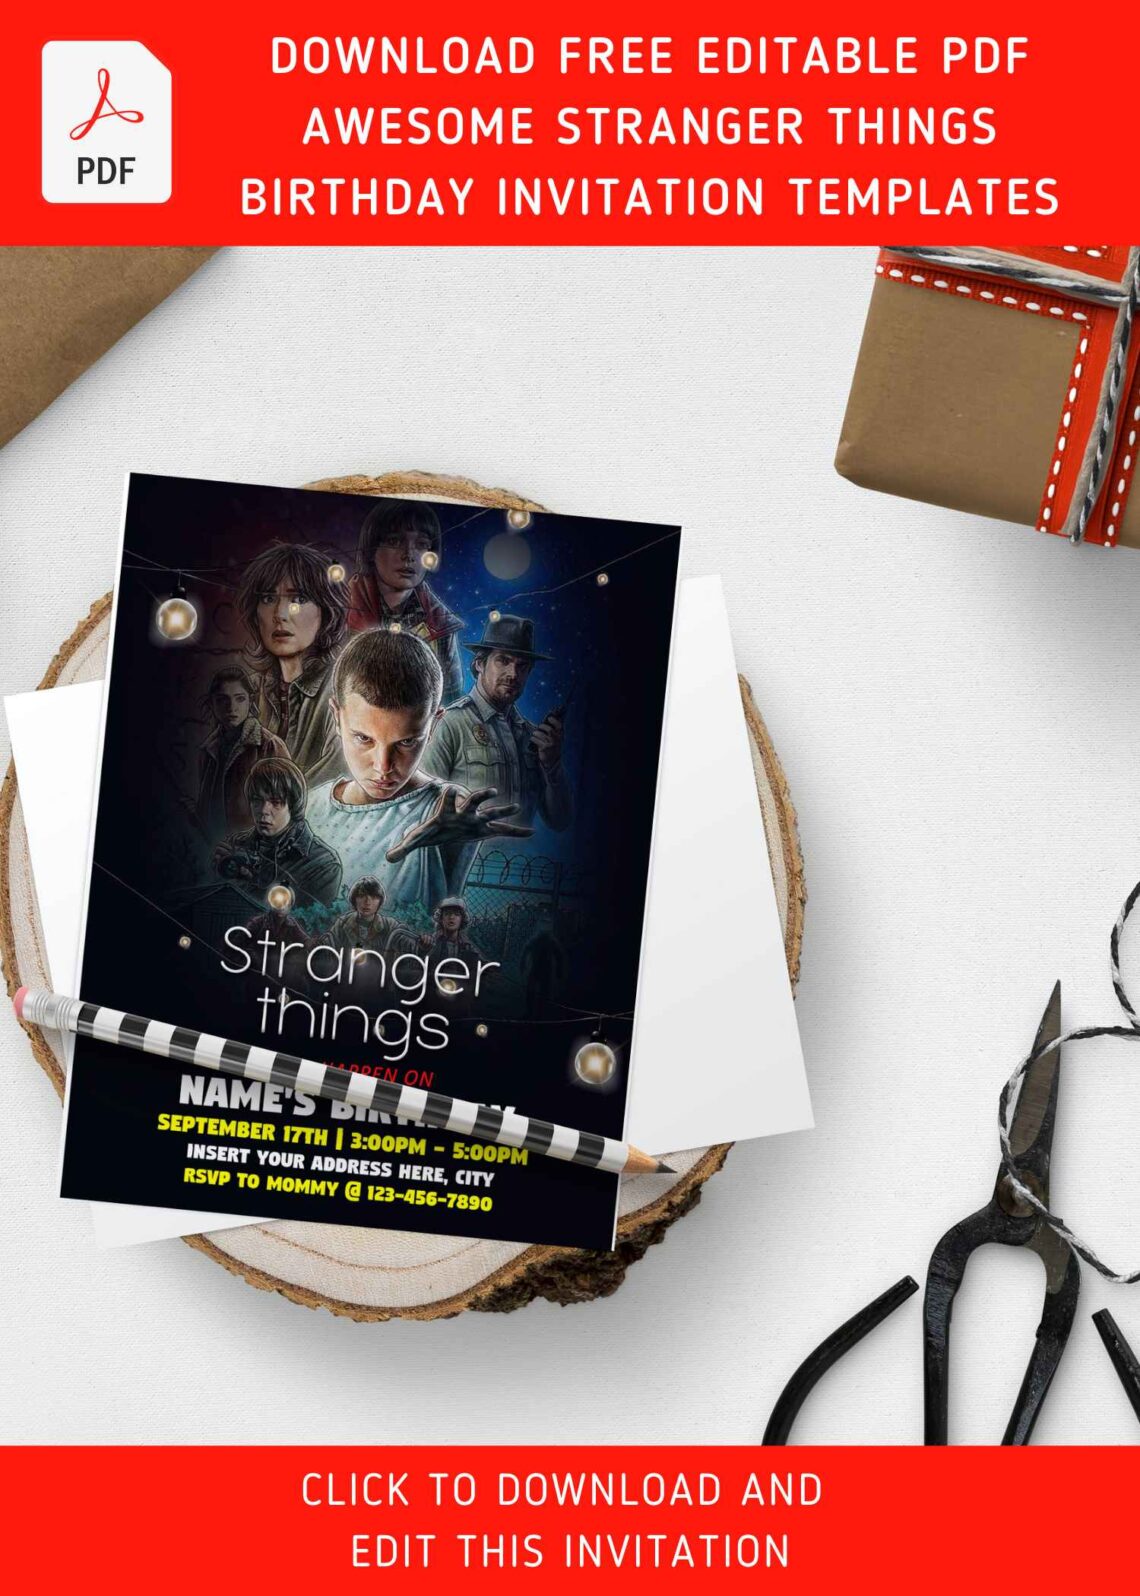 (Free Editable PDF) Awesome Stranger Things Sleepover Birthday Invitation Templates with cute text